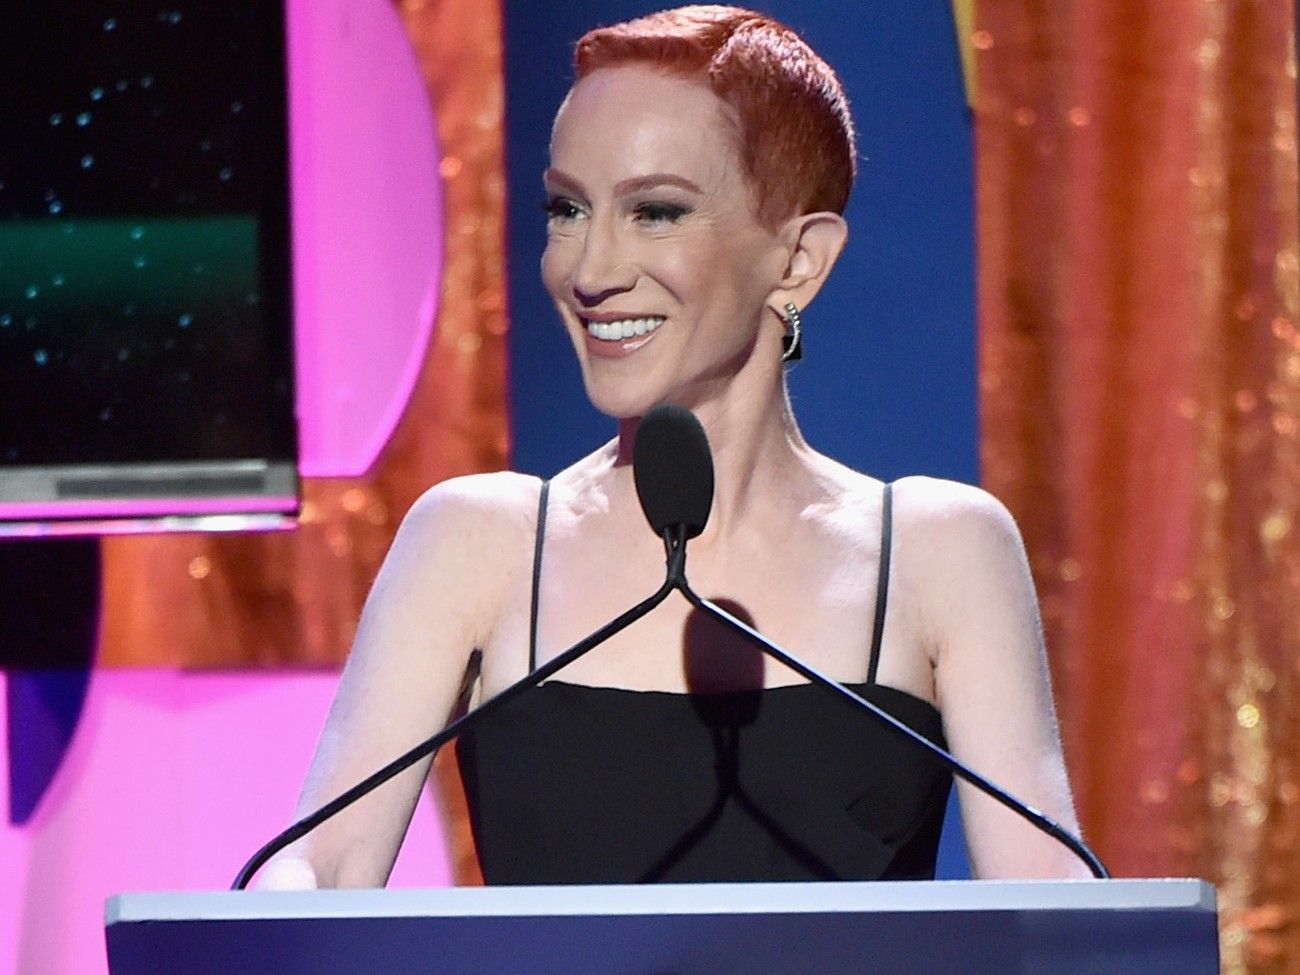 Comedian Kathy Griffin speaks onstage during the 2018 Writers Guild Awards L.A. Ceremony at The Beverly Hilton Hotel on February 11, 2018 in Beverly Hills, California. 